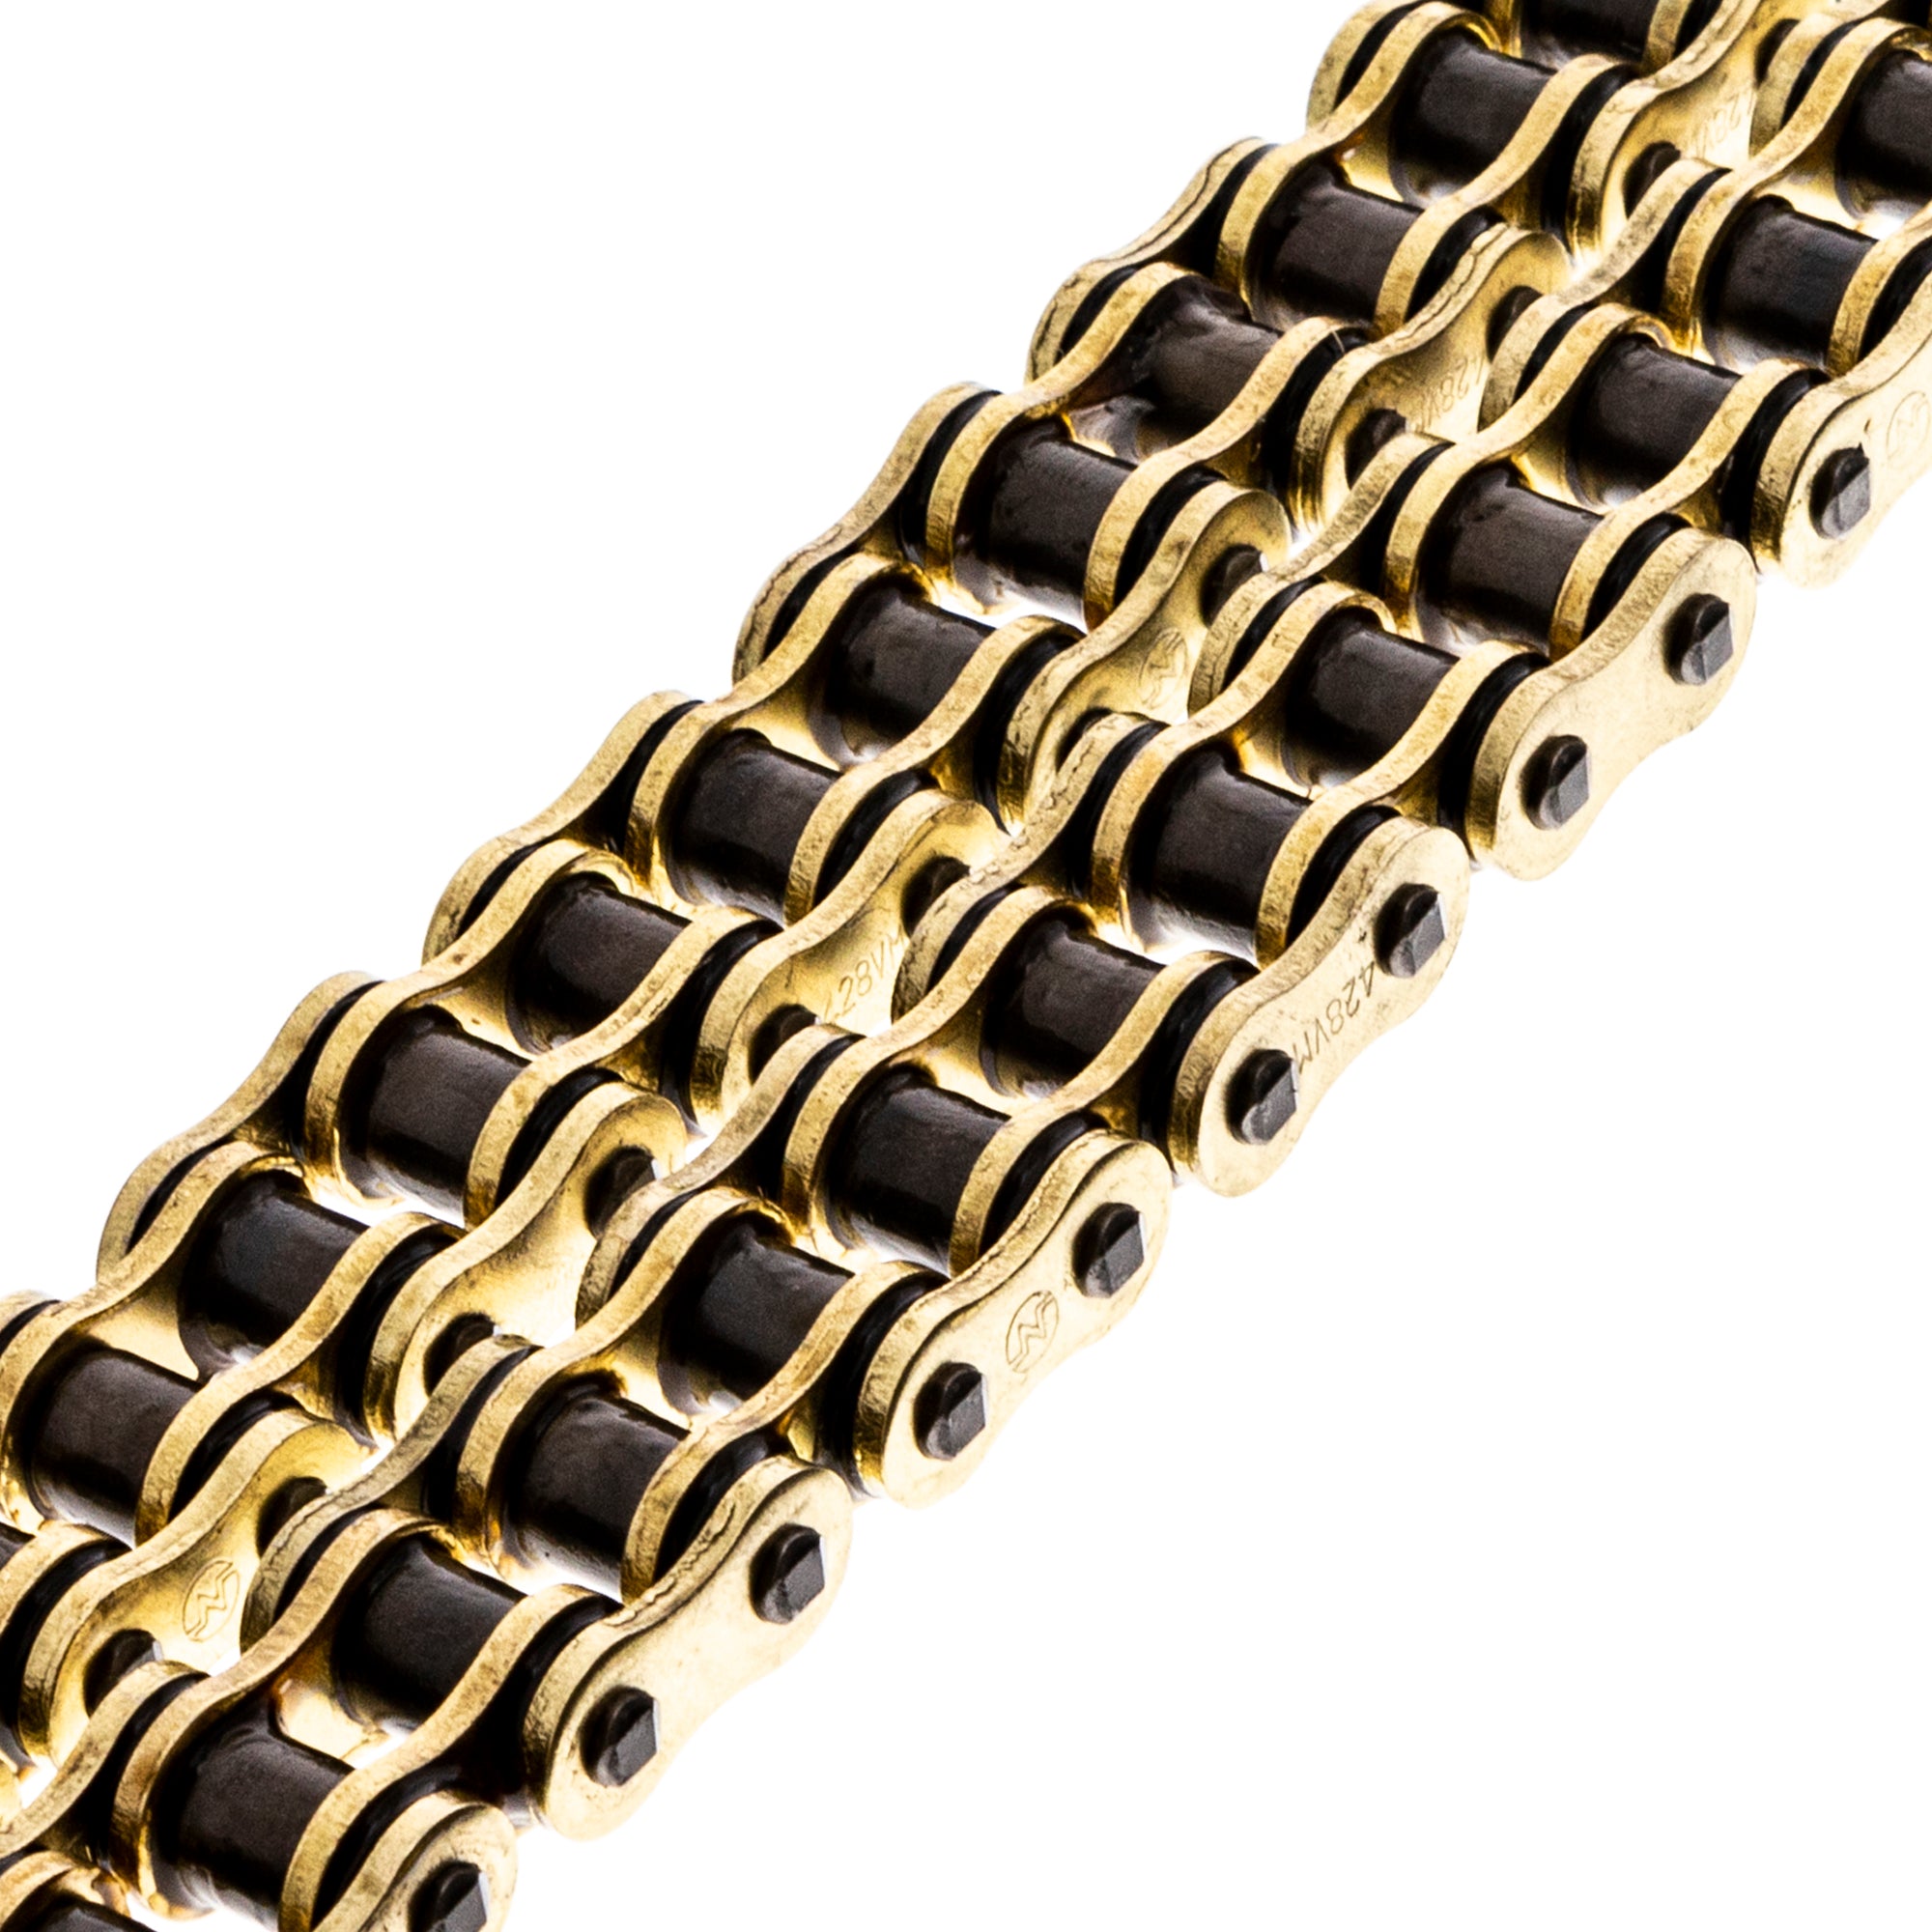 Gold X-Ring Chain 108 w/ Master Link for zOTHER YZ80 XL100S Trail RD200 5443 NICHE 519-CDC2554H